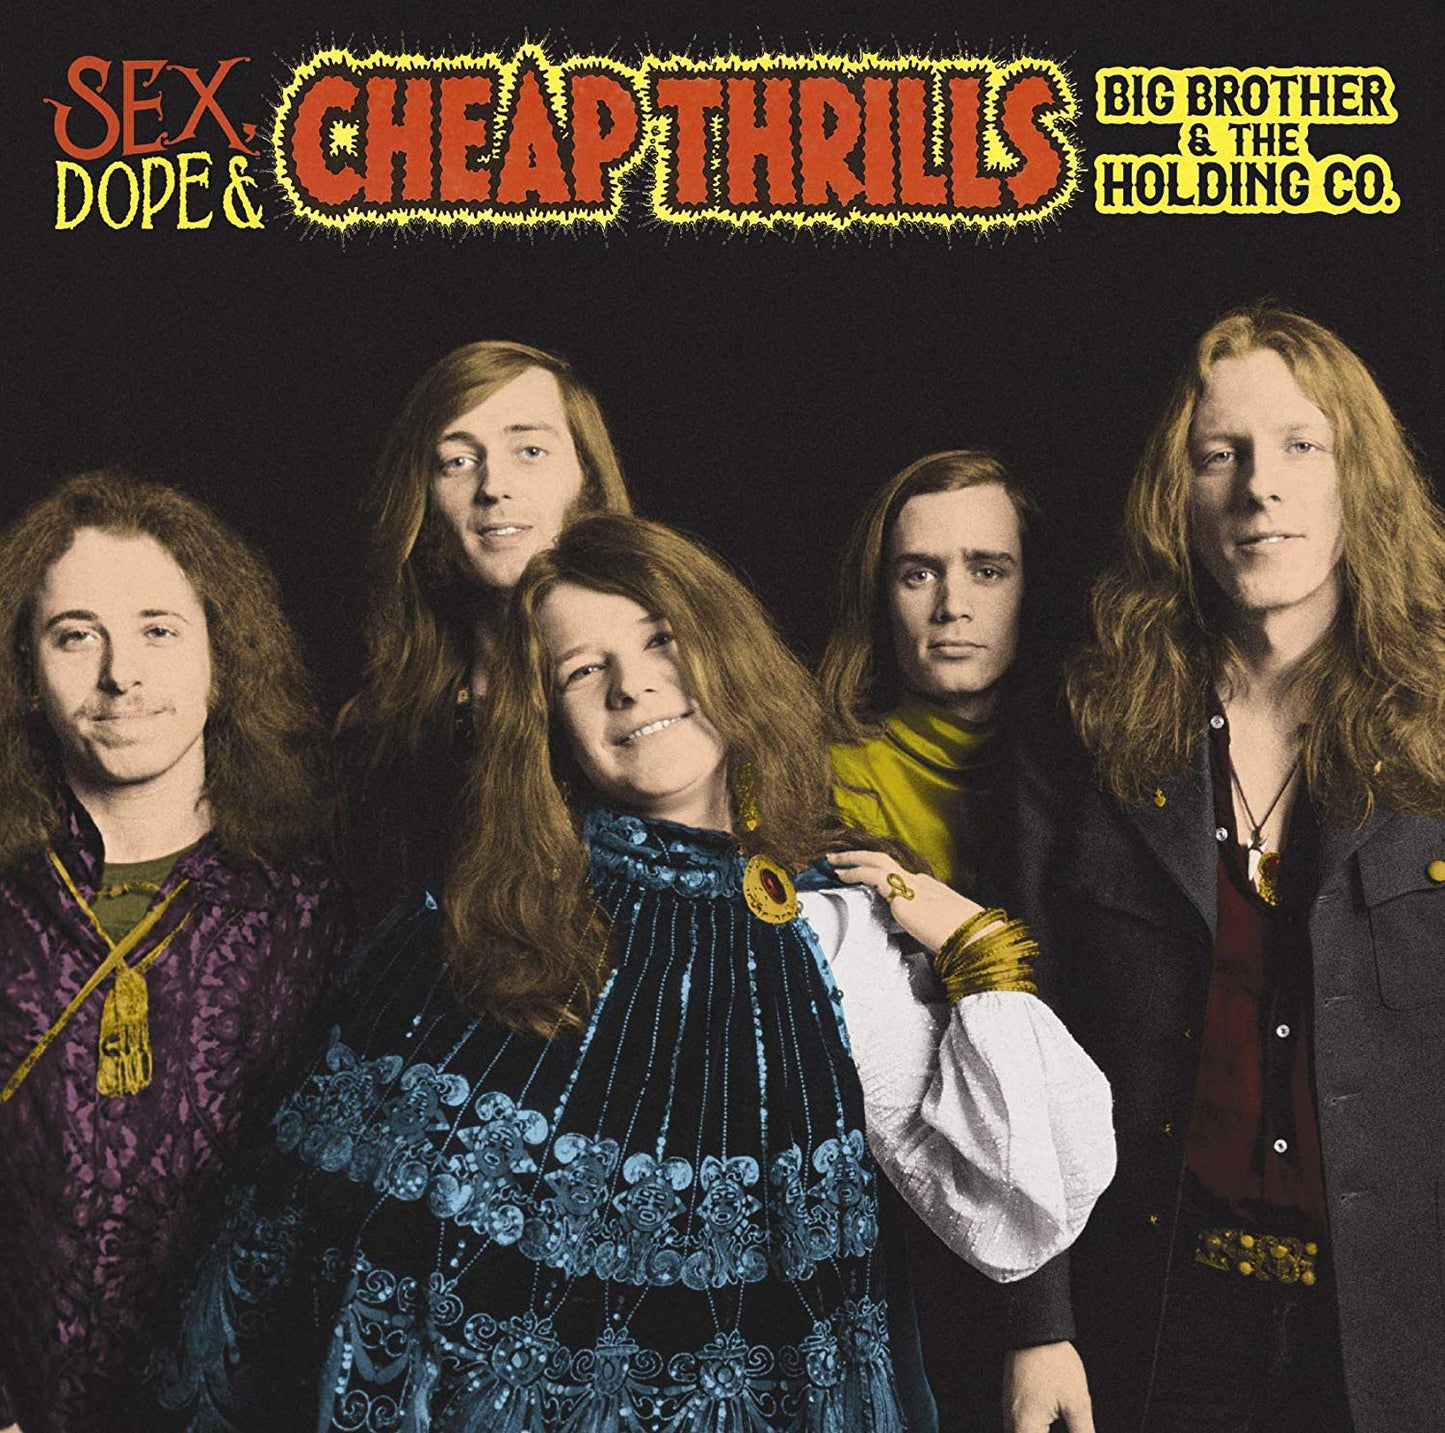 Big Brother & The Holding Company - Sex, Dope & Cheap Thrills - 2LP